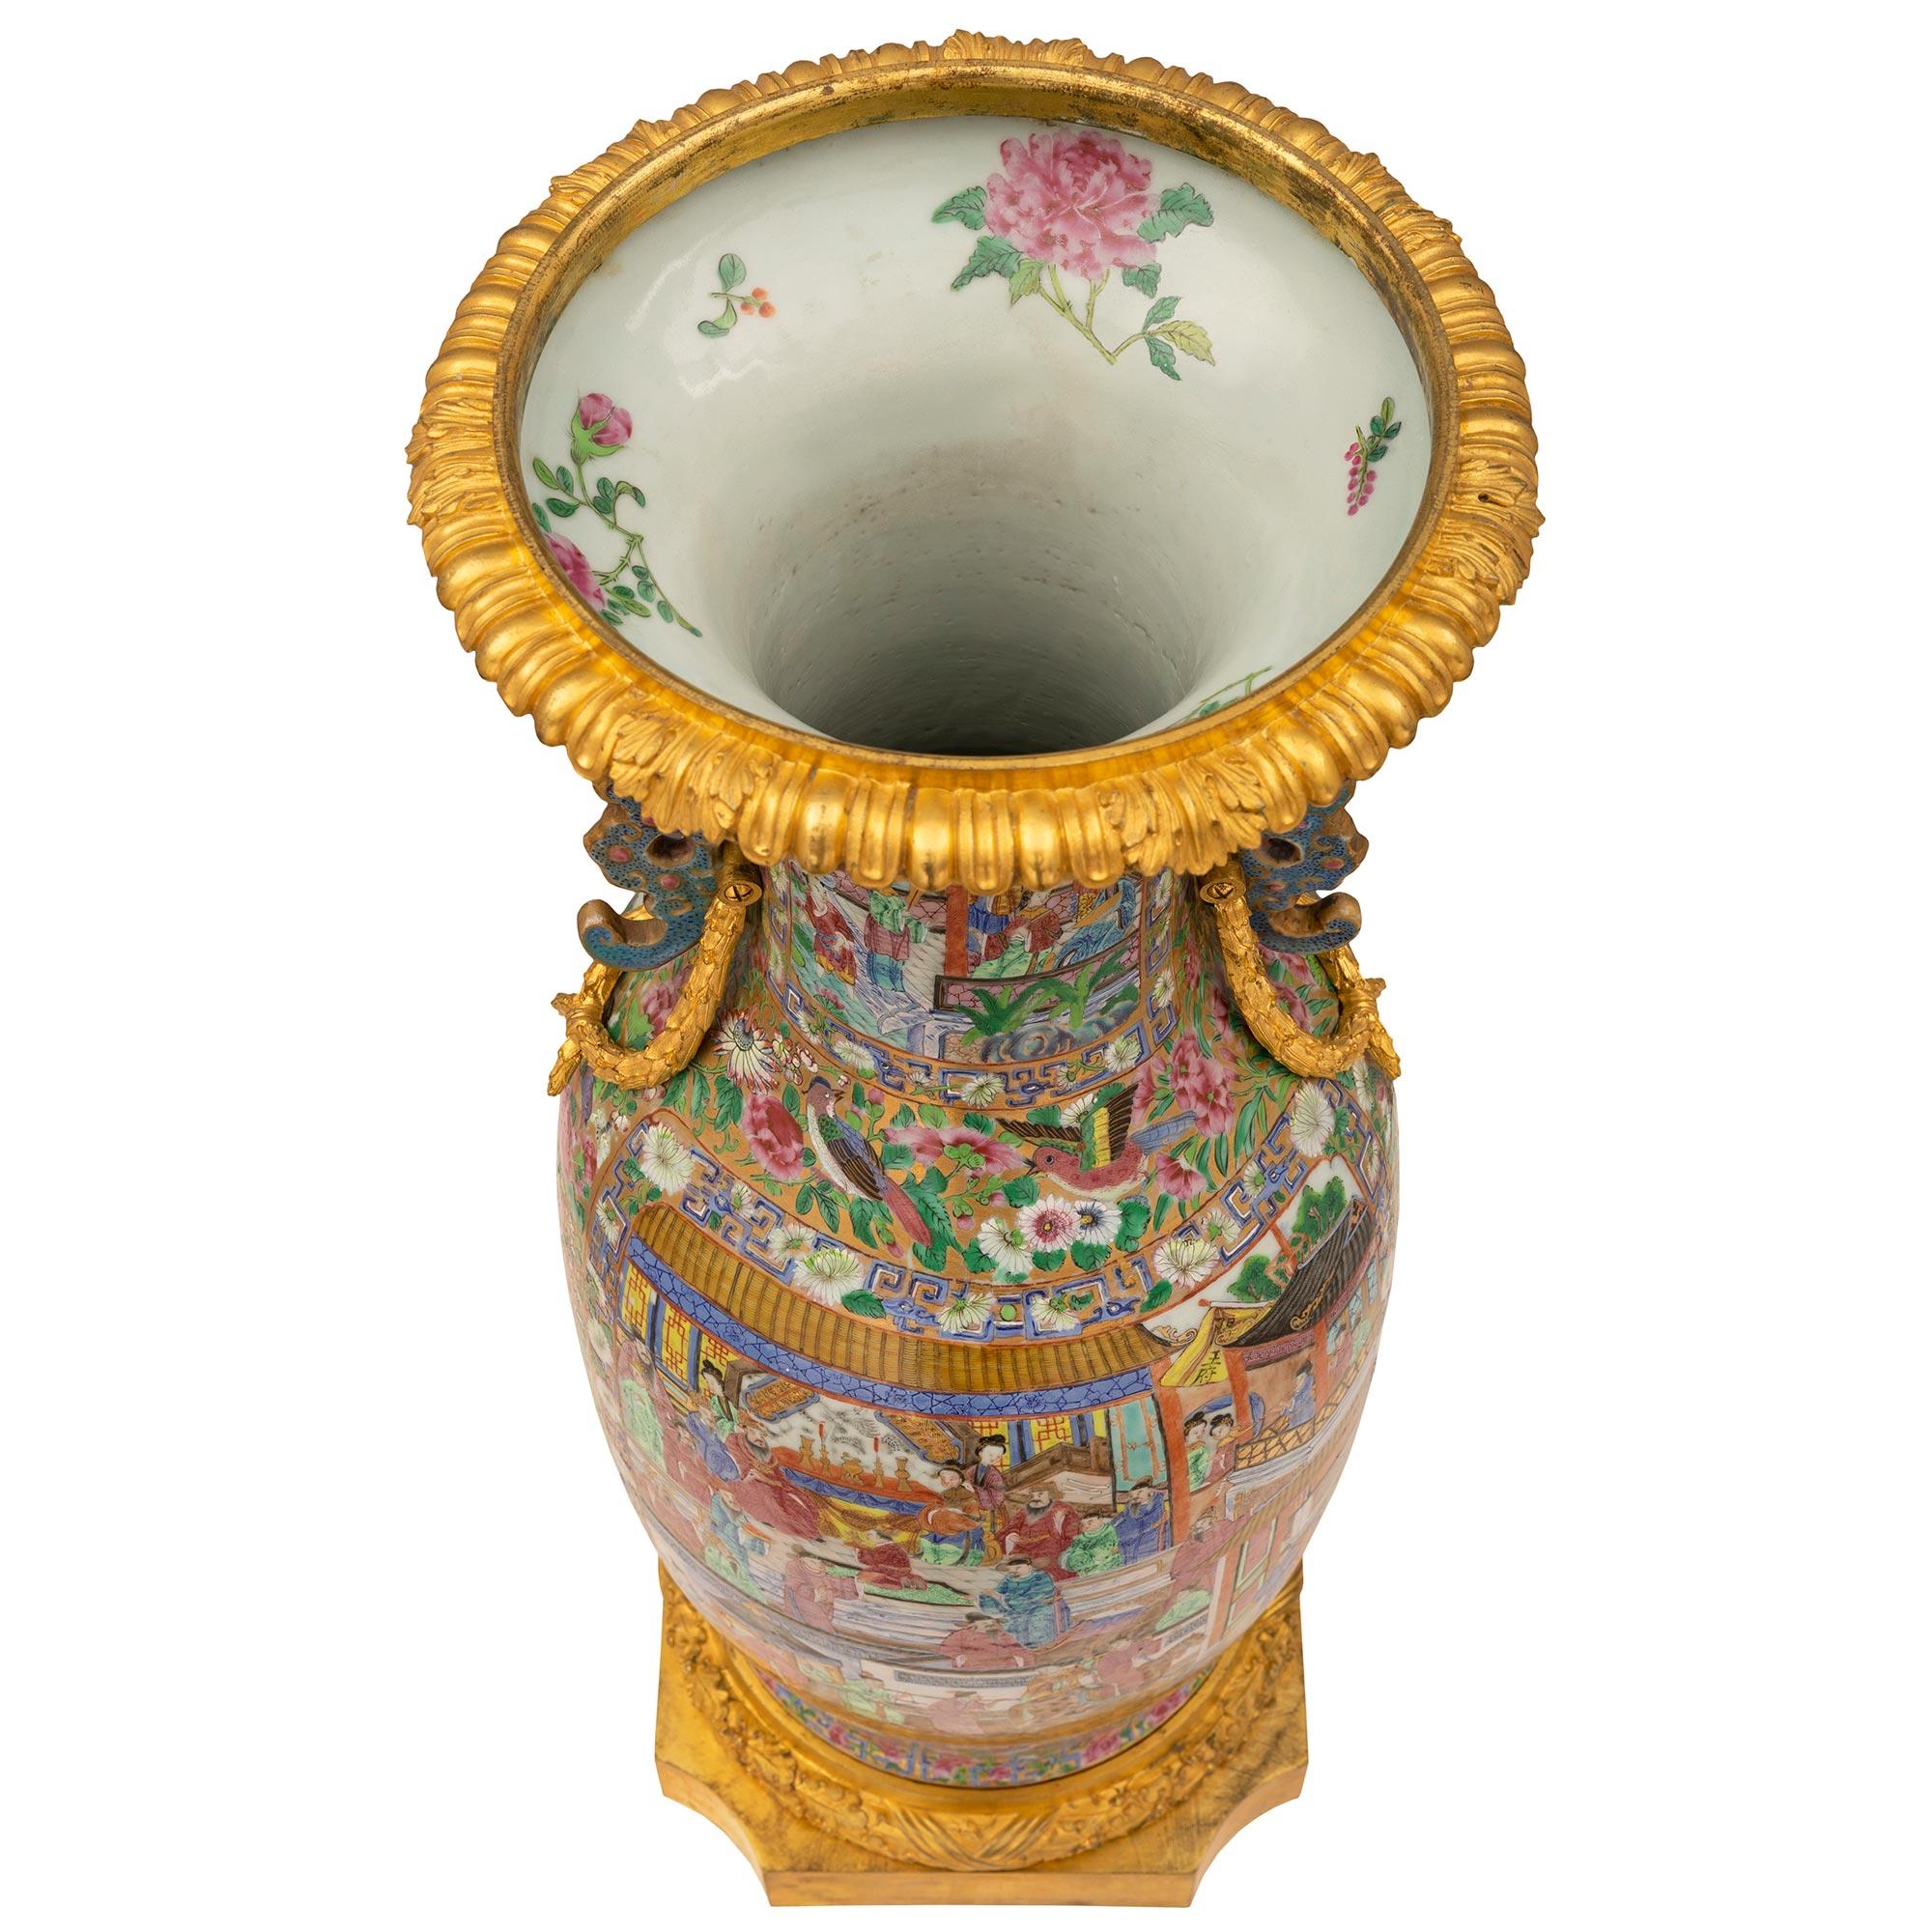 A beautiful and high quality French and Asian collaboration 19th century Louis XVI st. Famille Rose porcelain urn. The urn is raised by a fine square ormolu base with concave corners and a richly chased wrap around tied berried laurel band. The